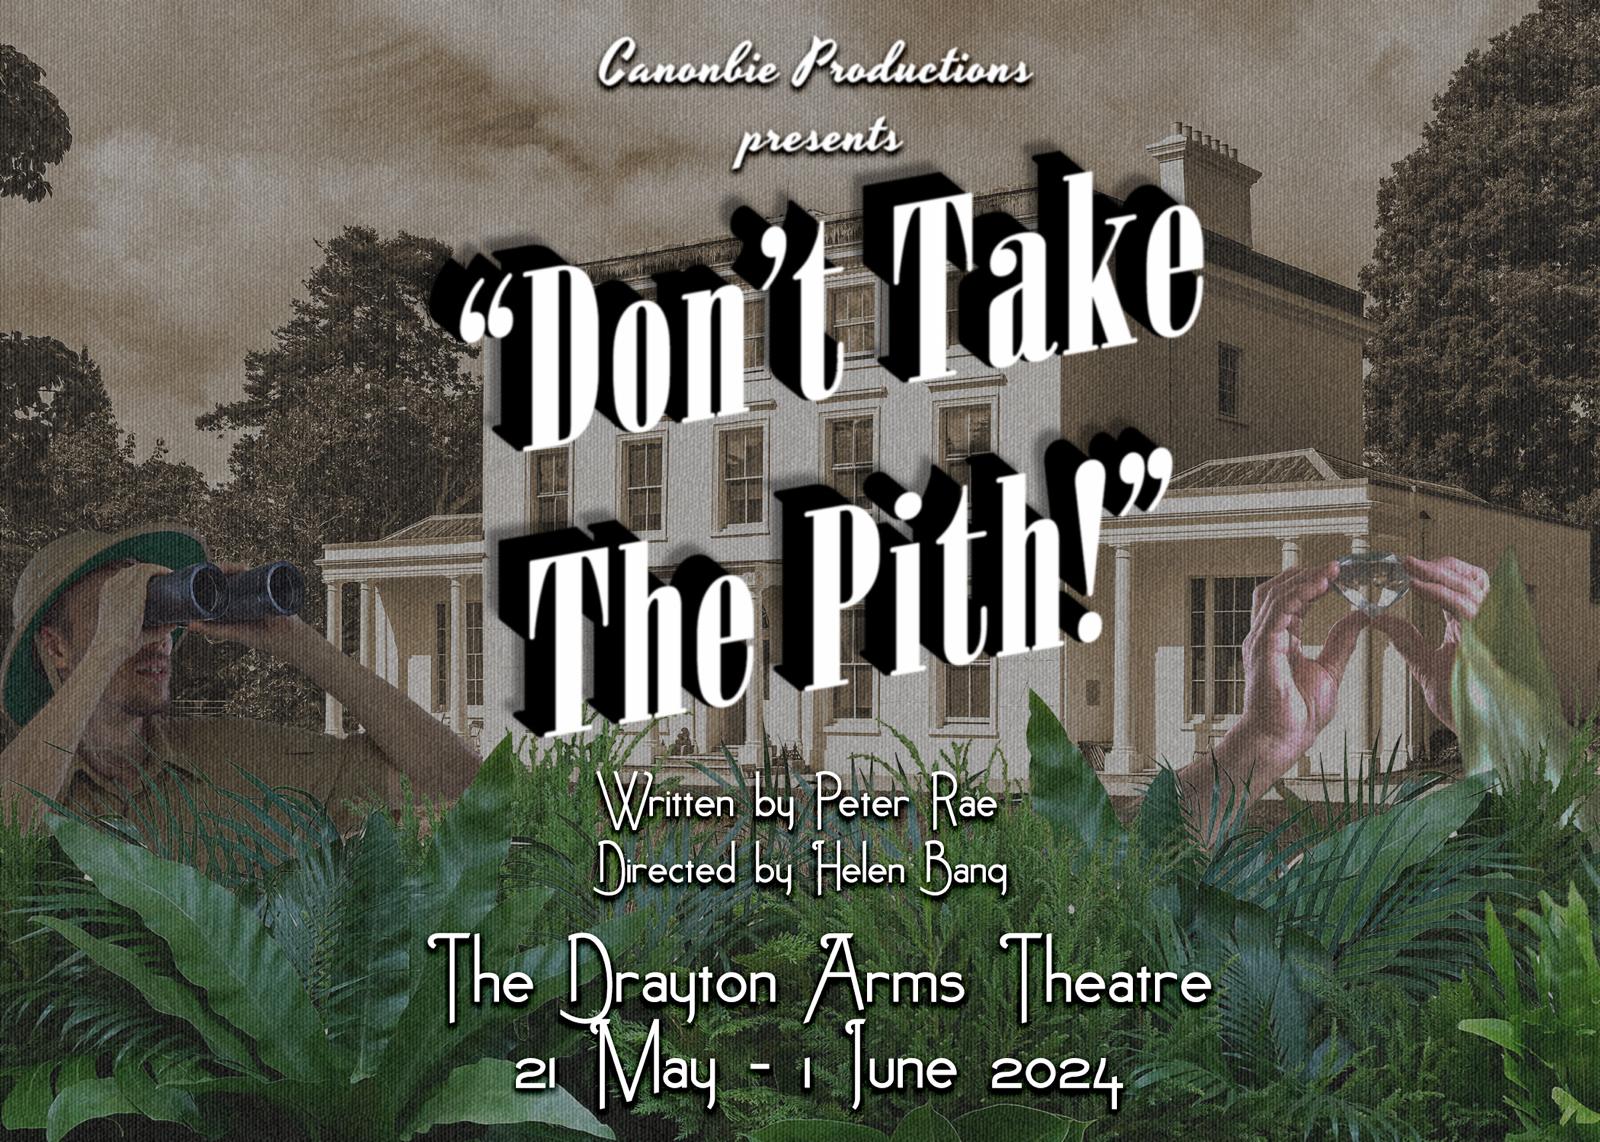 Don’t Take The Pith!